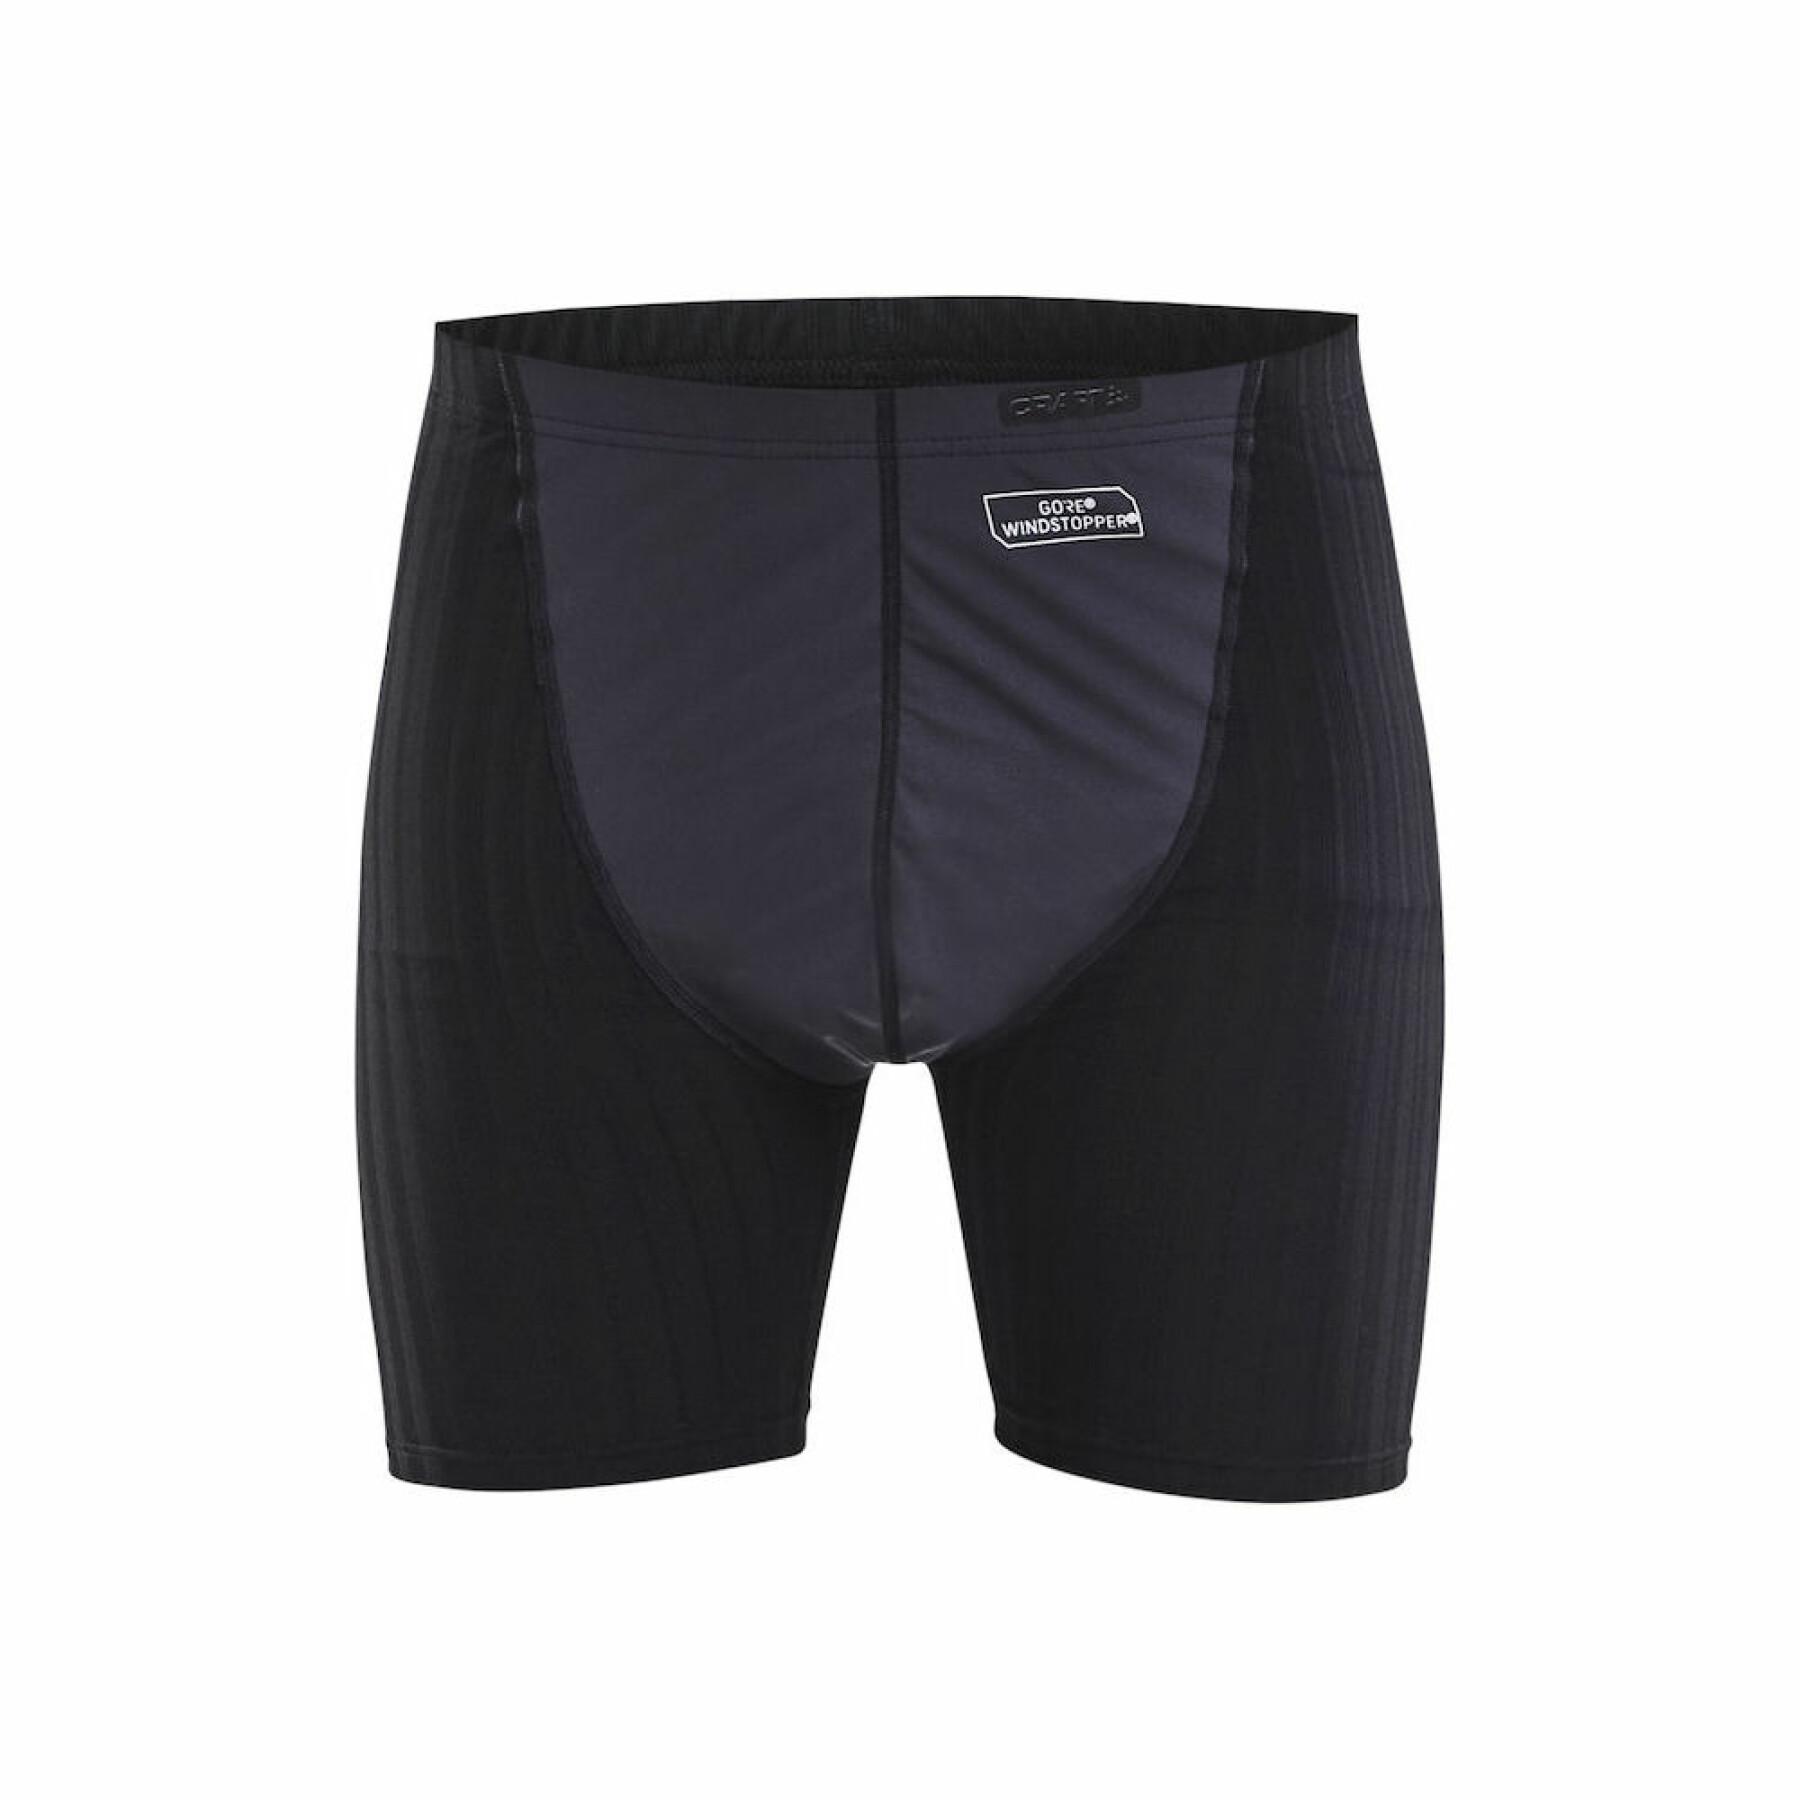 Windproof boxer shorts Craft be active extreme 2.0